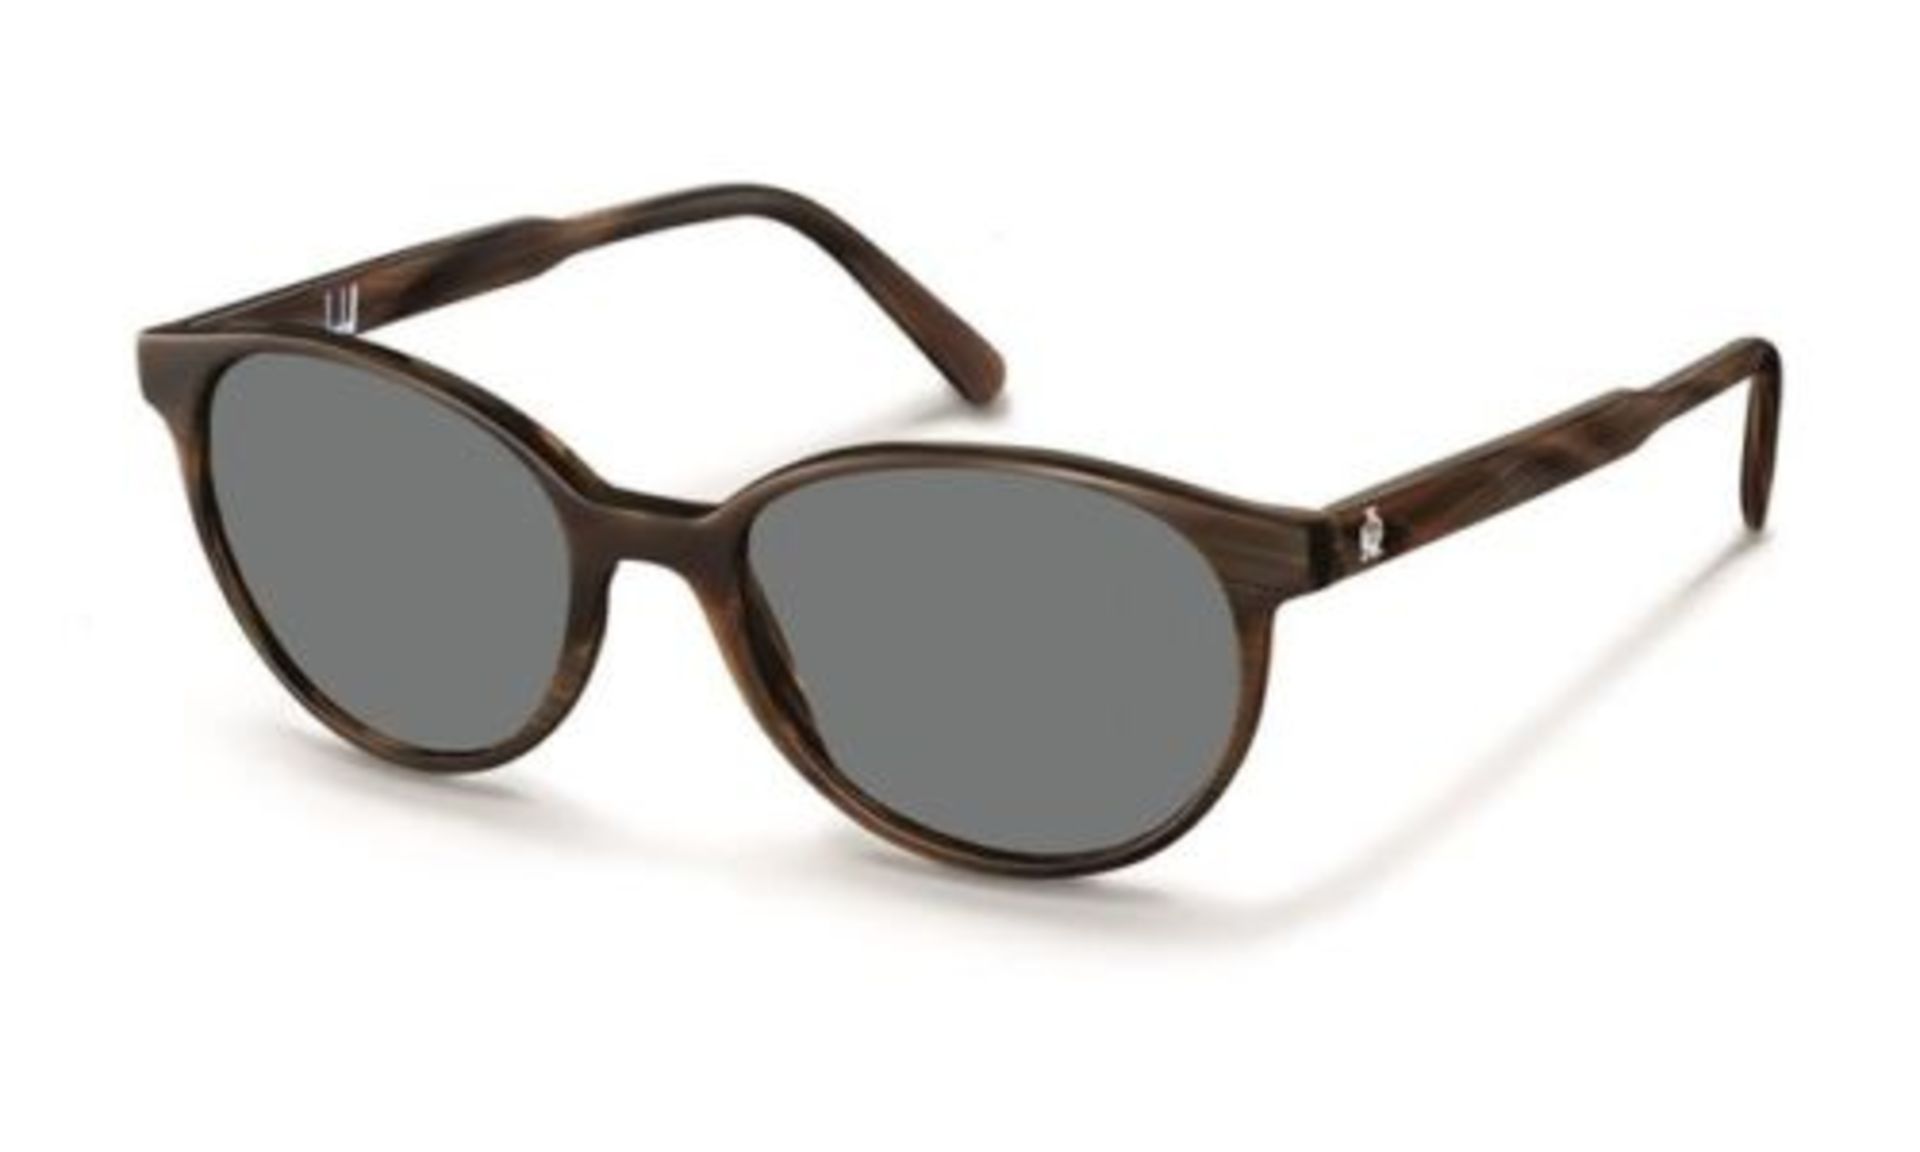 Brand New Pair Of Womens Dunhill Sunglasses - Brown Plastic Frame with Grey Lens RRP: £179.99